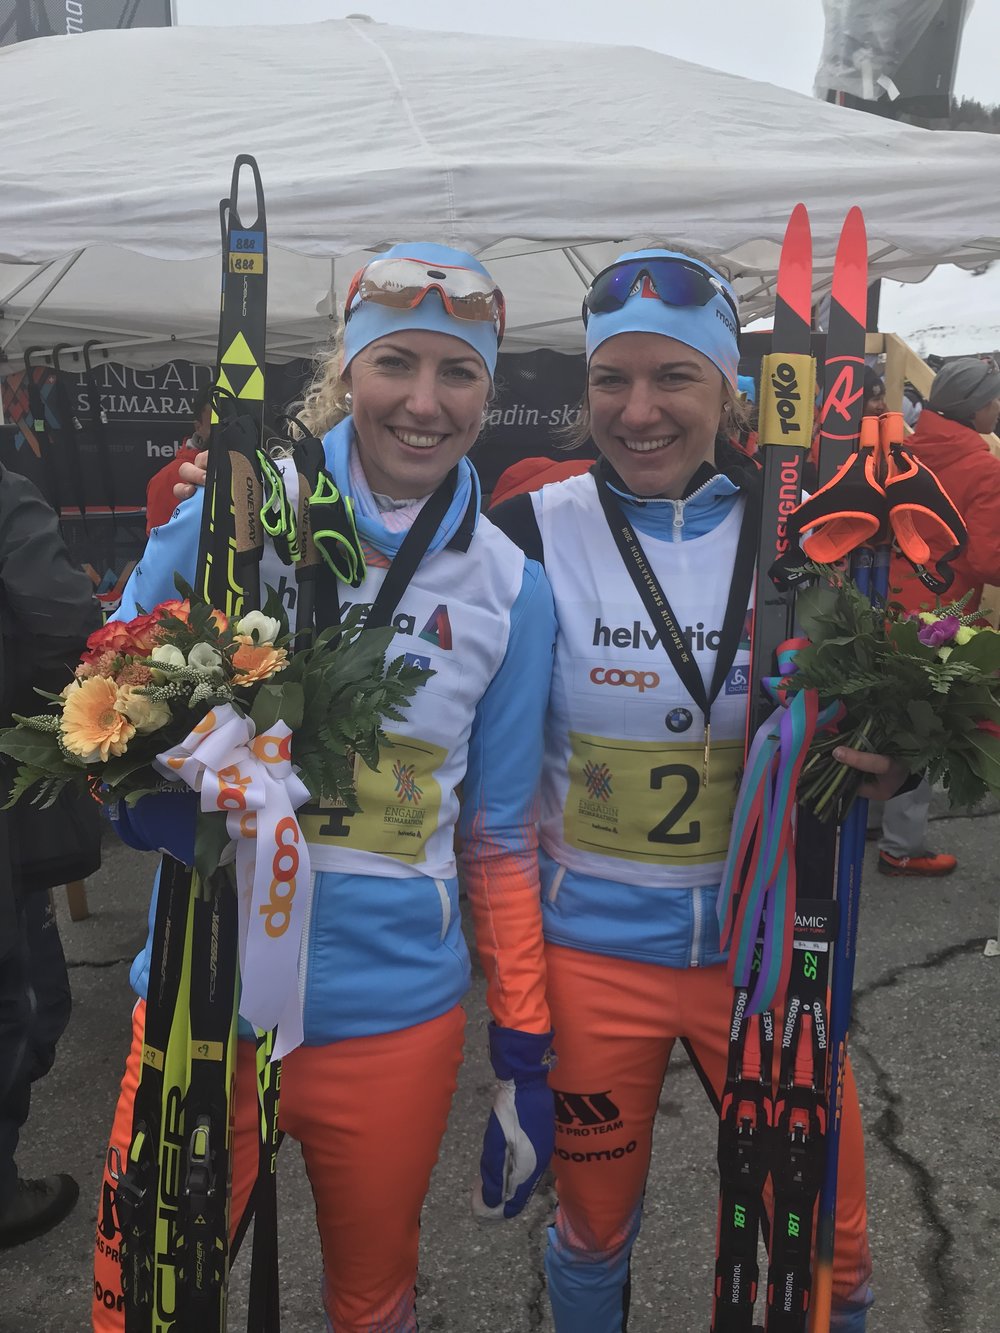  Maria Gräfnings and Rahel Imoberdorf. My two training partners and good friends after placing 2nd and 4th in the Engadiner. Without these two ladies, I wouldn’t have enjoyed this year and season with the SAS ProTeam as much as I did!  